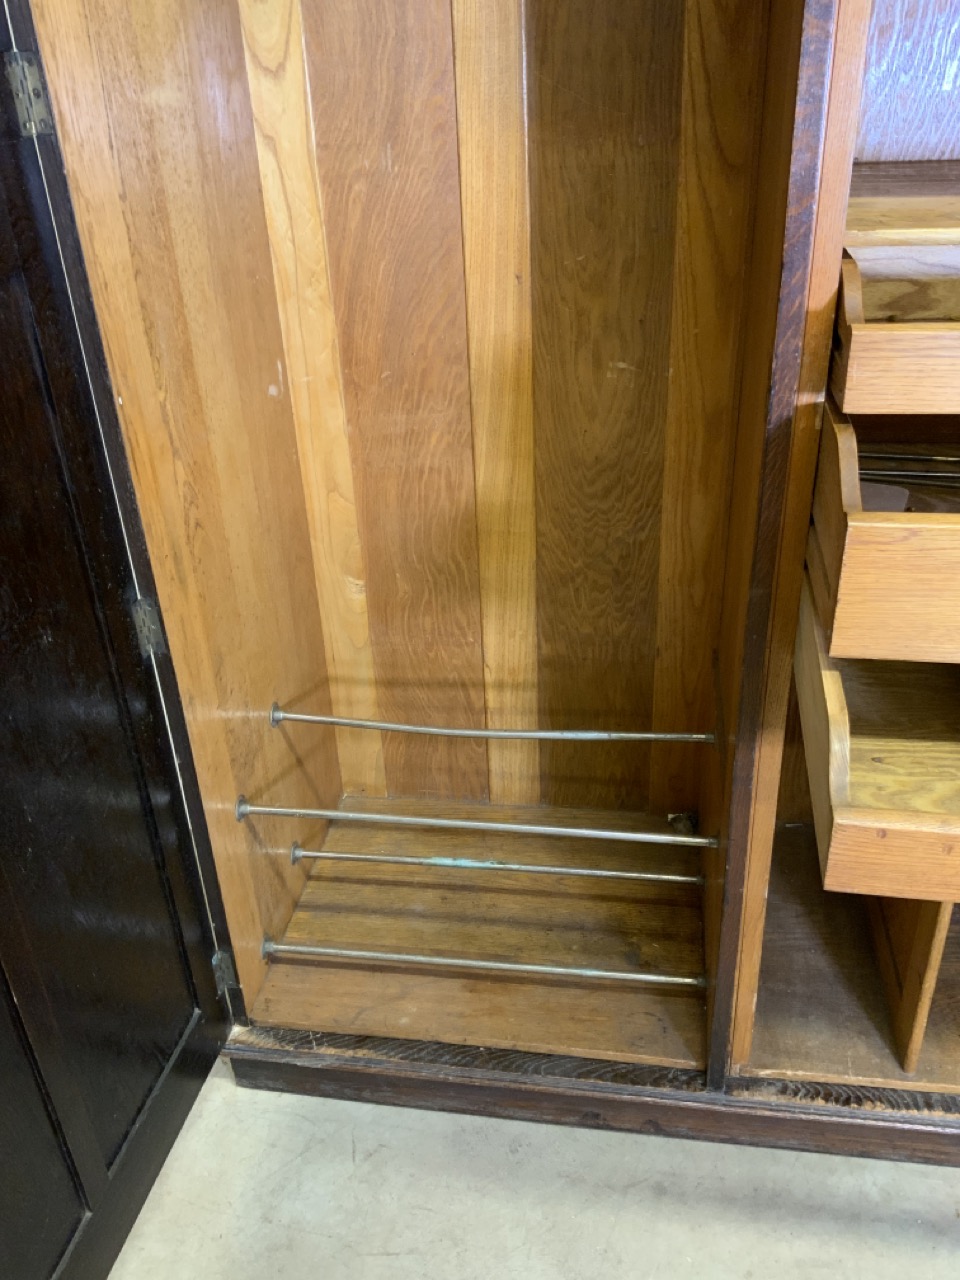 An early 20th century gentlemanâ€™s oak double wardrobe by Awlyn furniture with fitted shelves, - Image 6 of 10